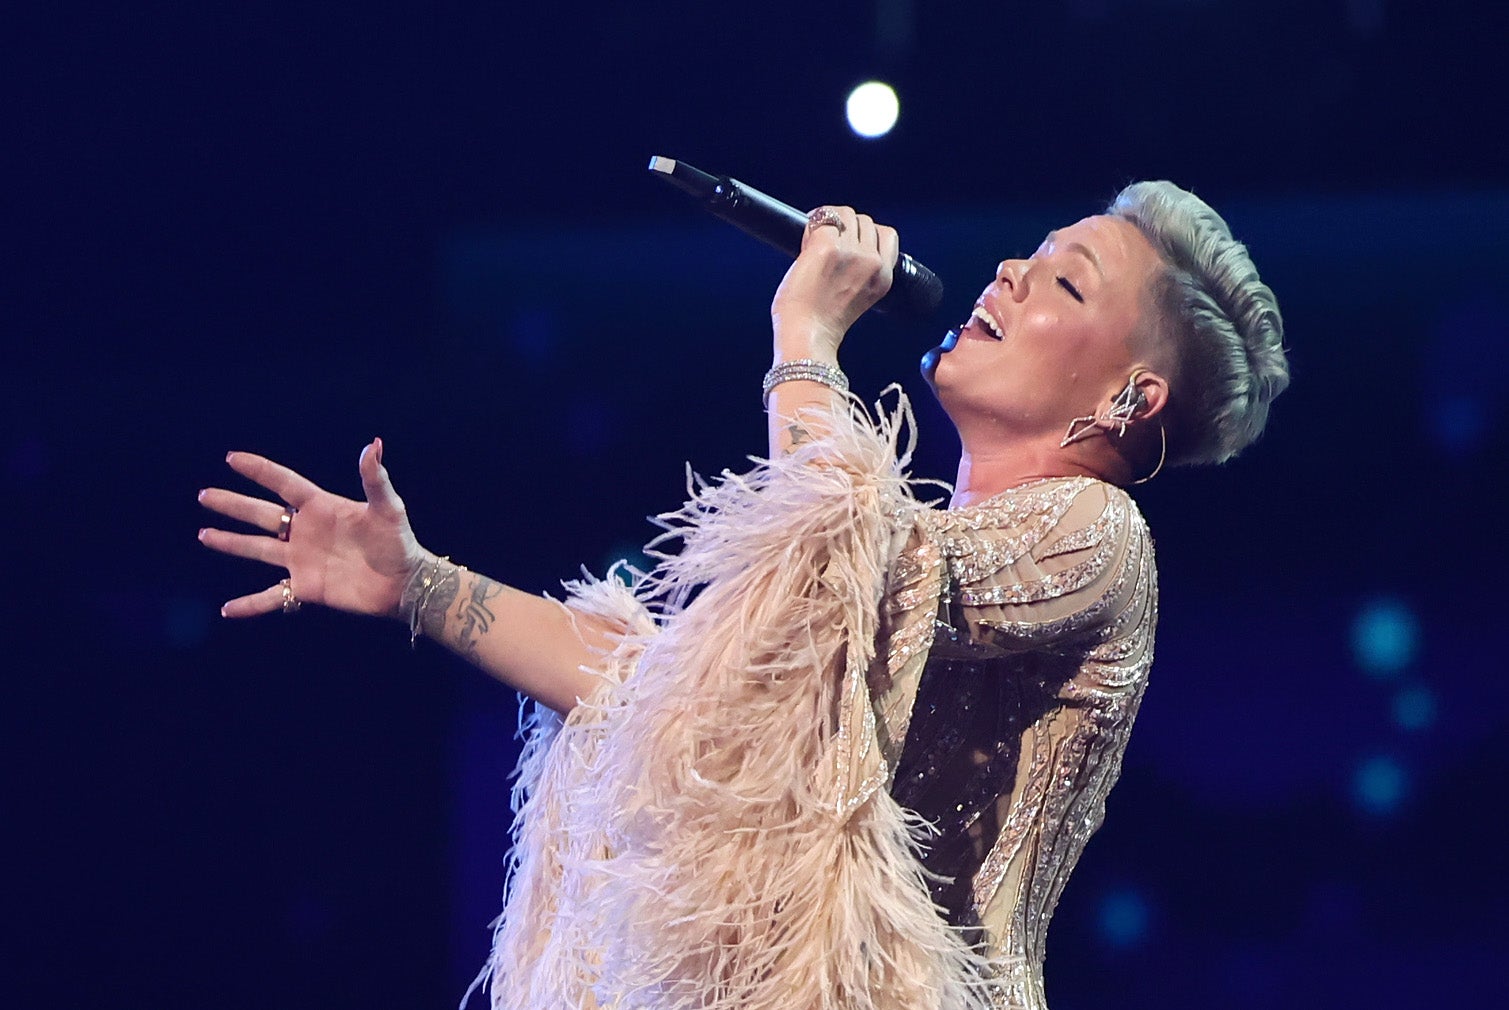 P!nk is colourblind to double negatives, it would seem